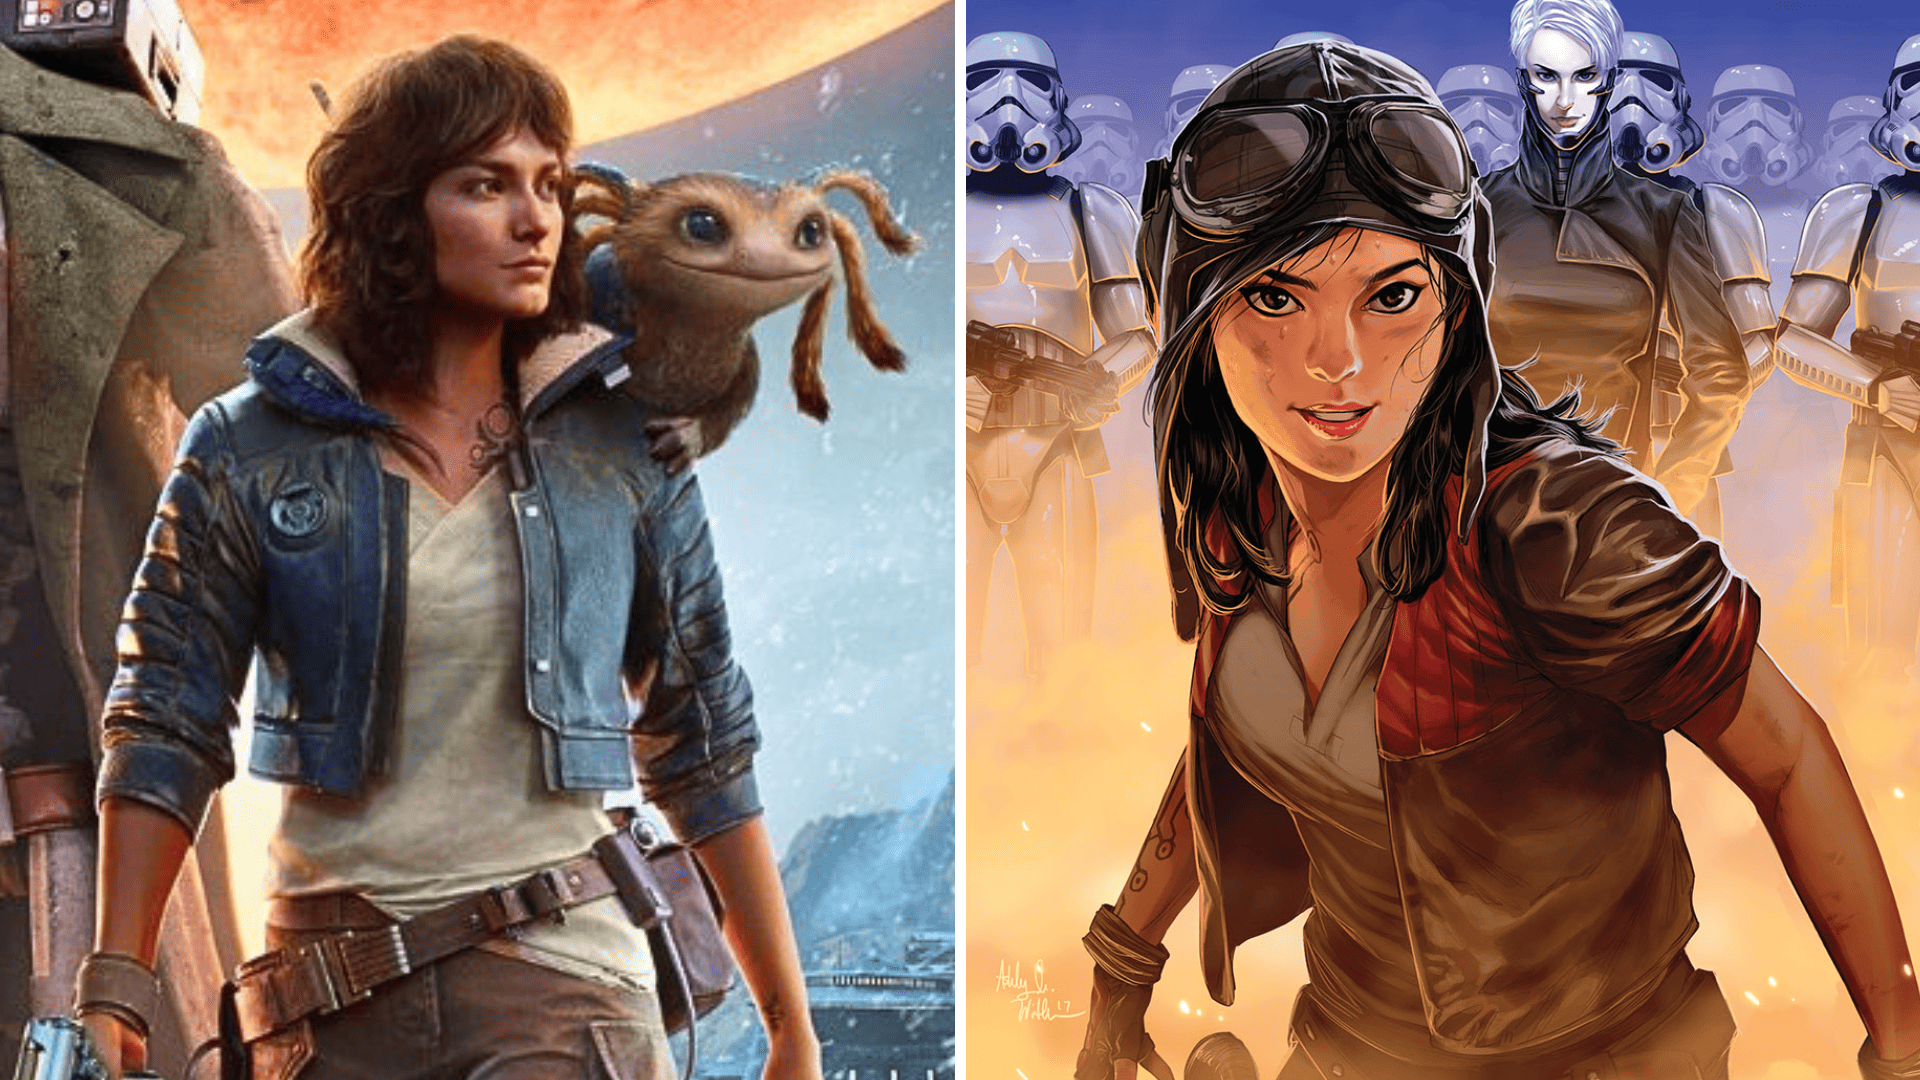 Could Doctor Aphra appear in Star Wars